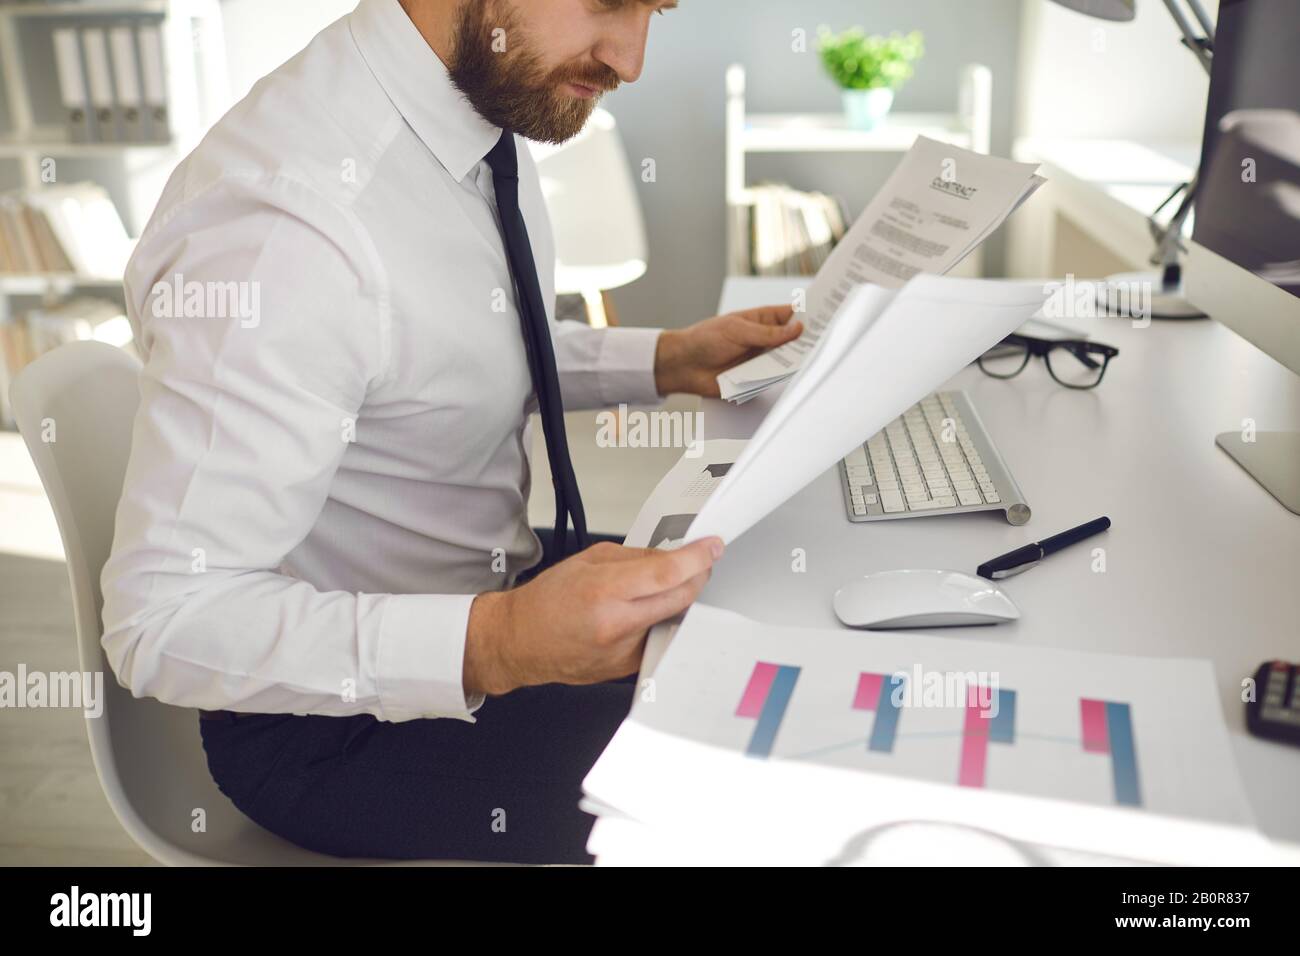 Office work is faceless. Businessman works at a table with a computer in the office. Stock Photo